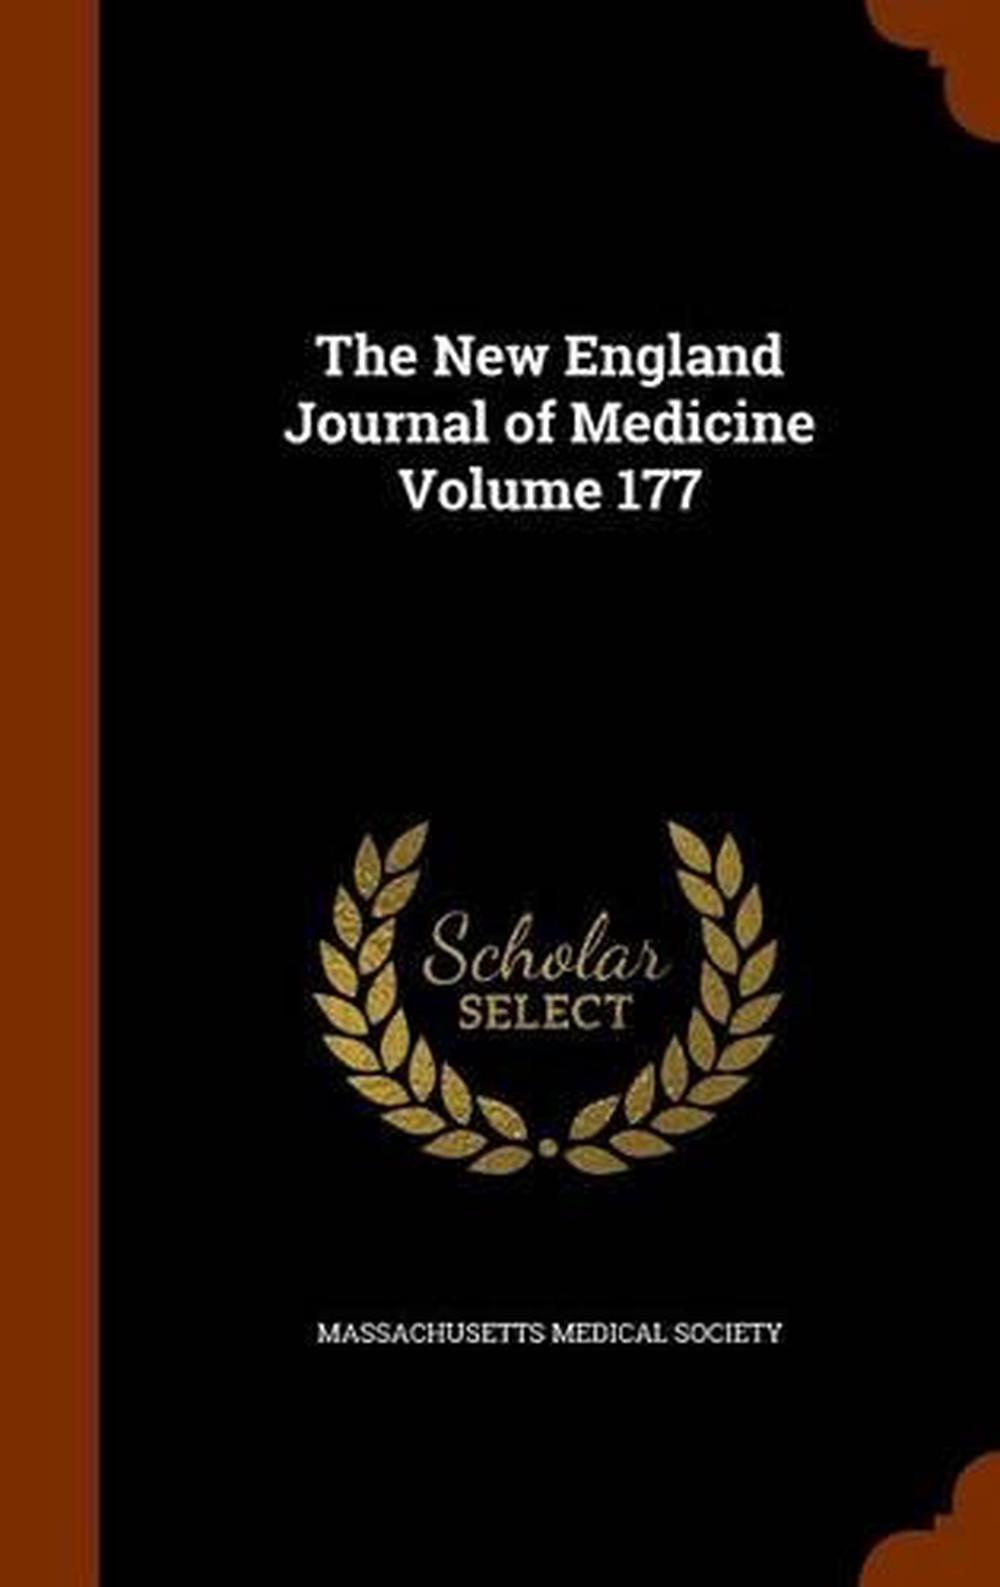 new england journal of medicine perspectives